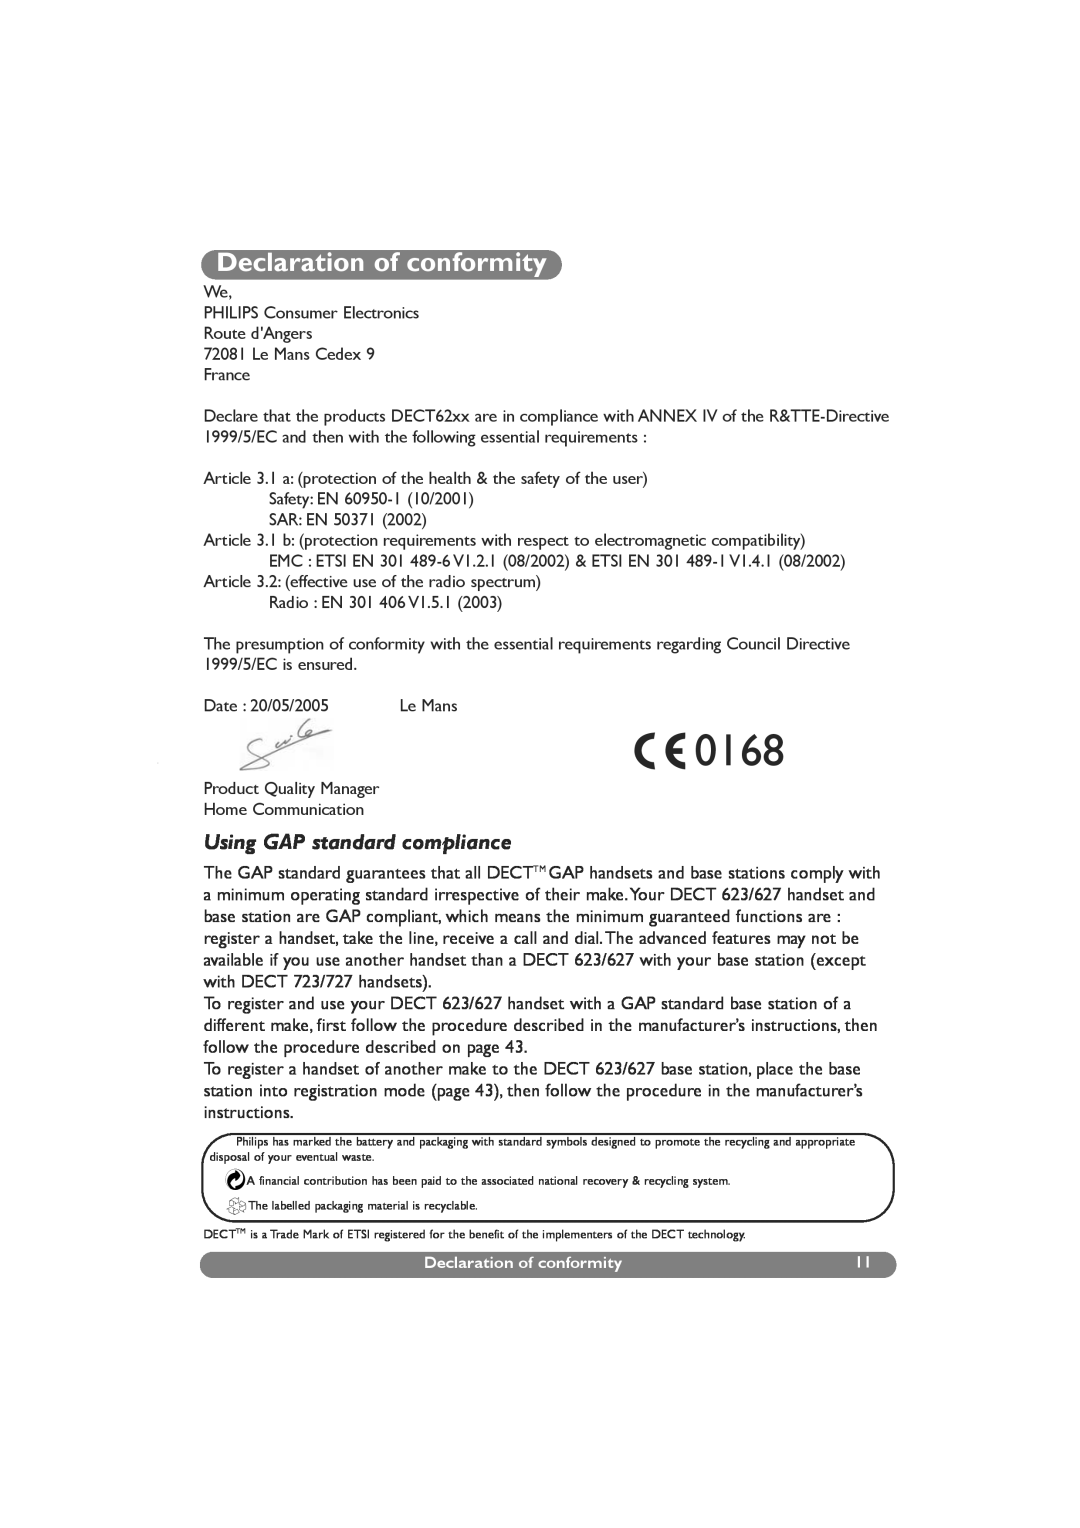 Philips DECT 627, DECT 629 manual Declaration of conformity, Using GAP standard compliance, 0168 